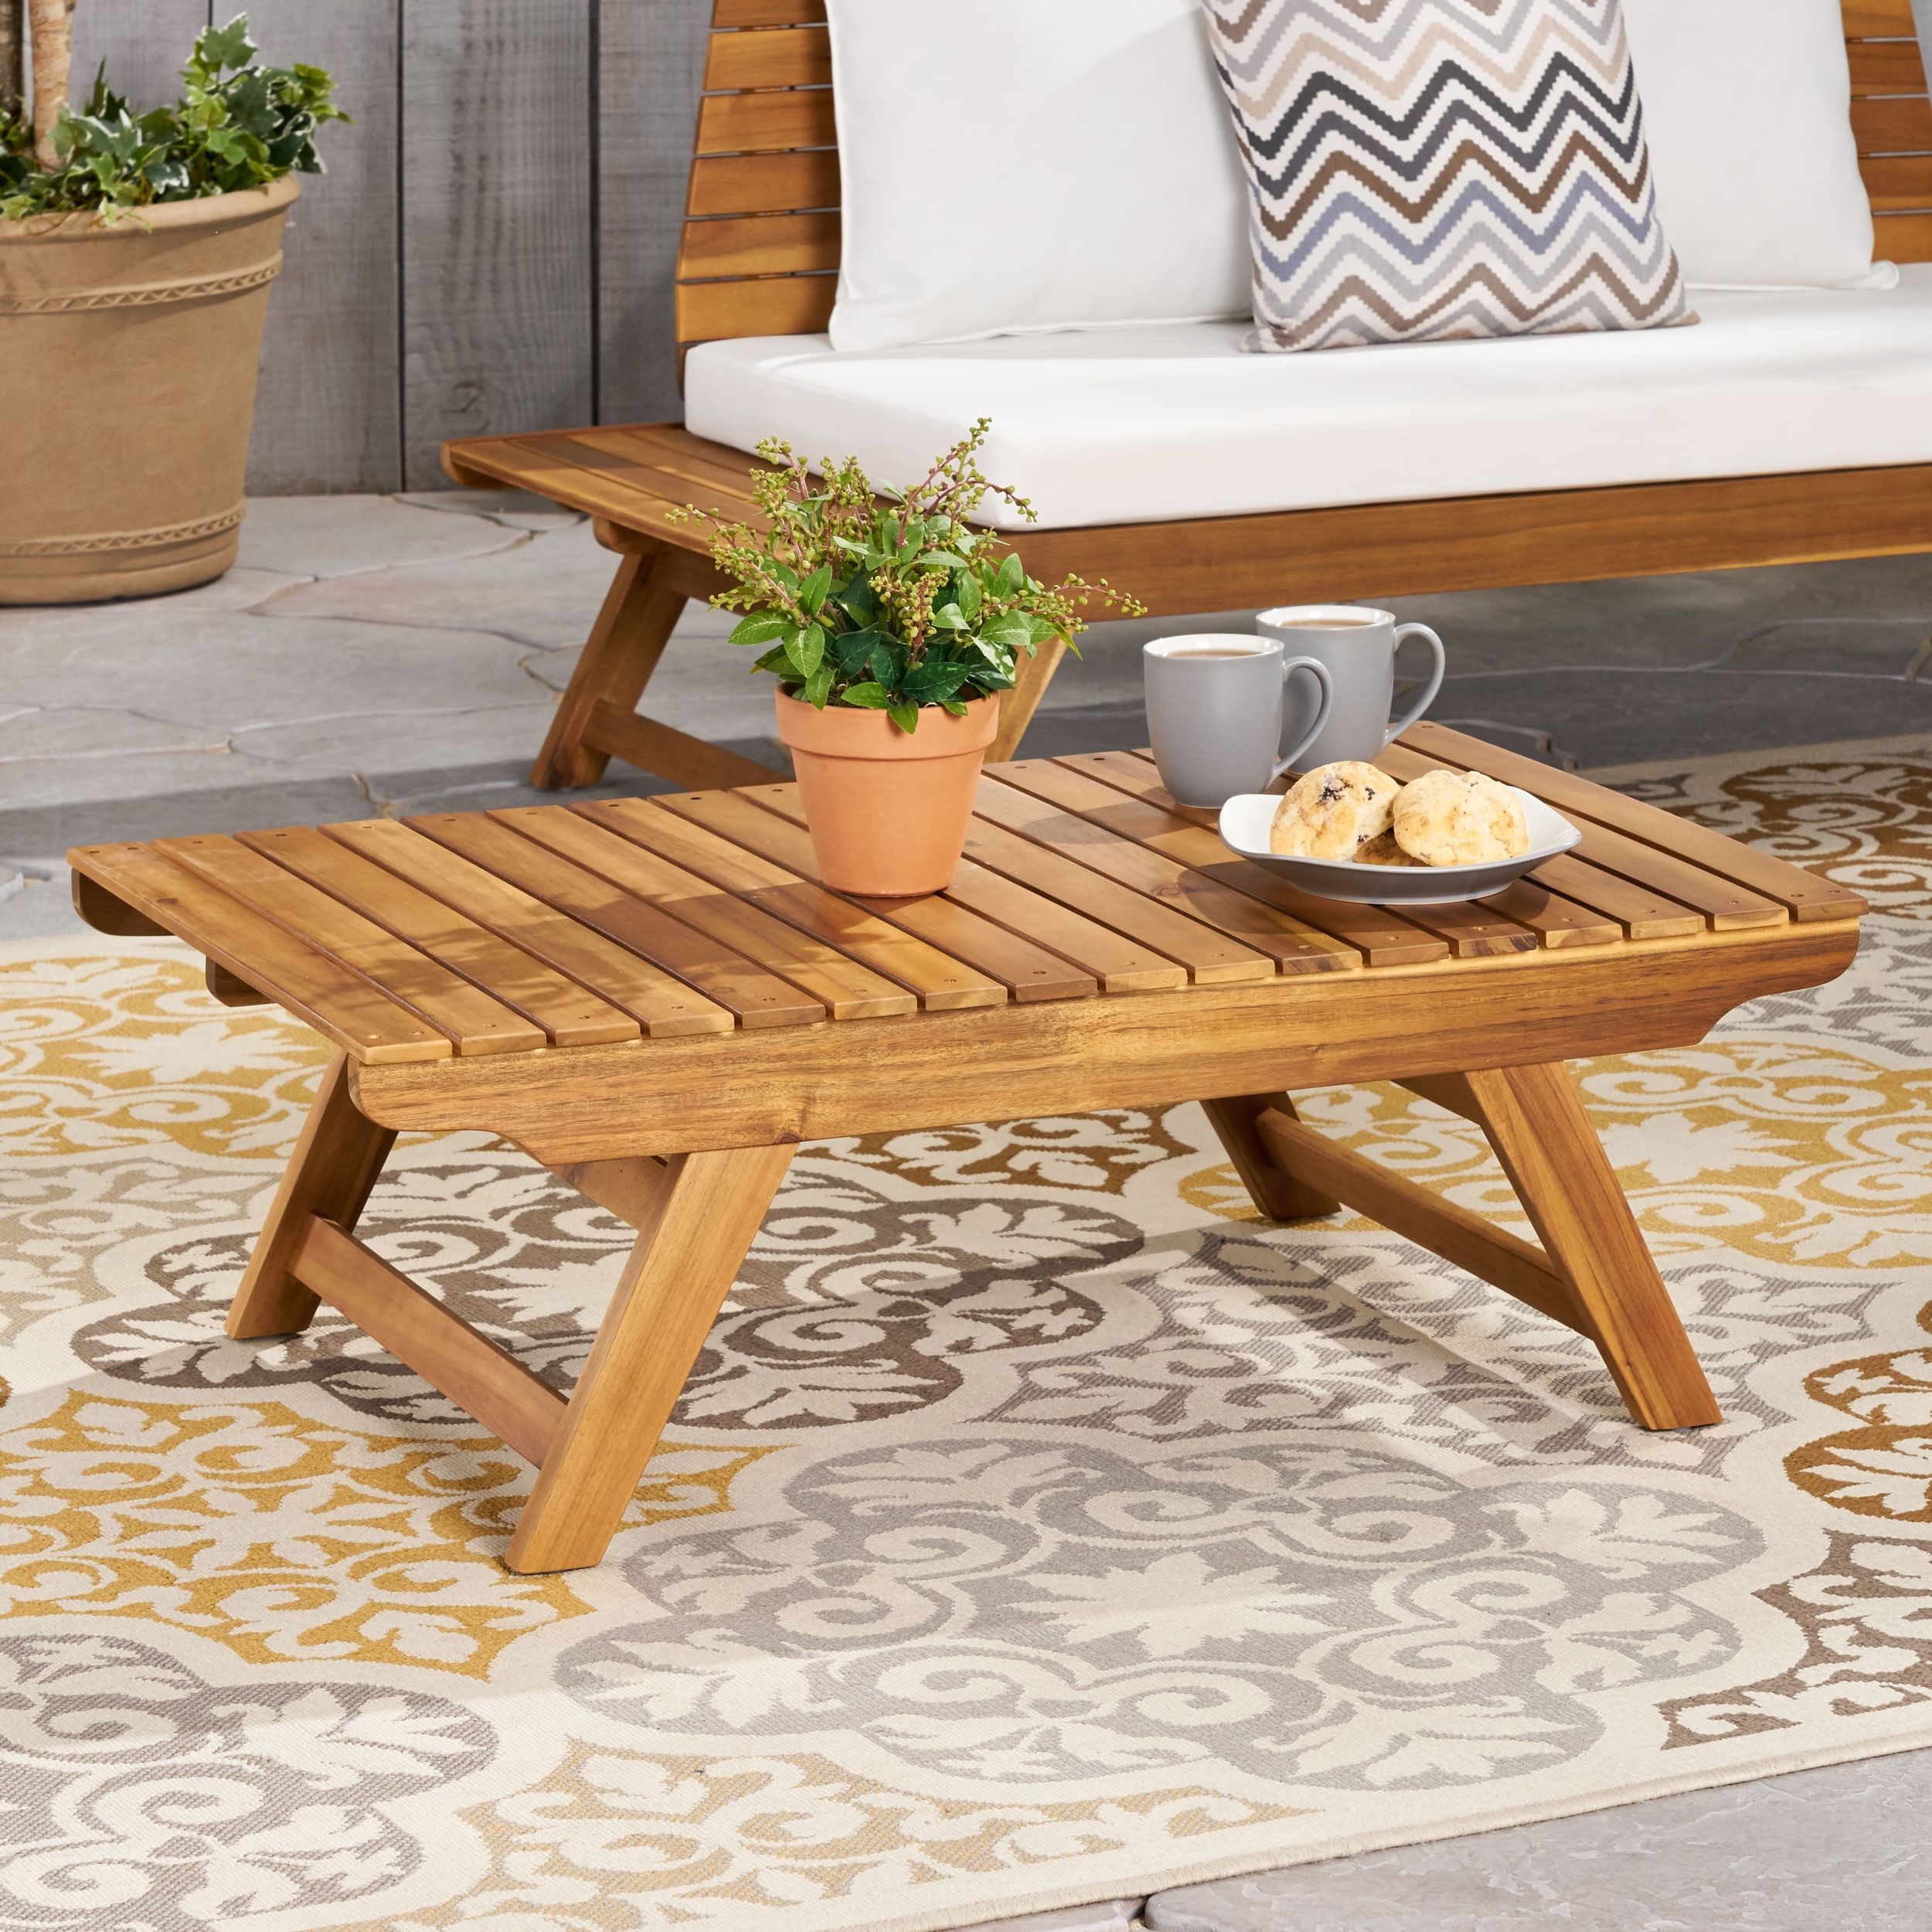 Trendy Ledger Outdoor Wooden Coffee Table, Teak – Walmart – Walmart Inside Outdoor Coffee Tables With Storage (View 15 of 15)